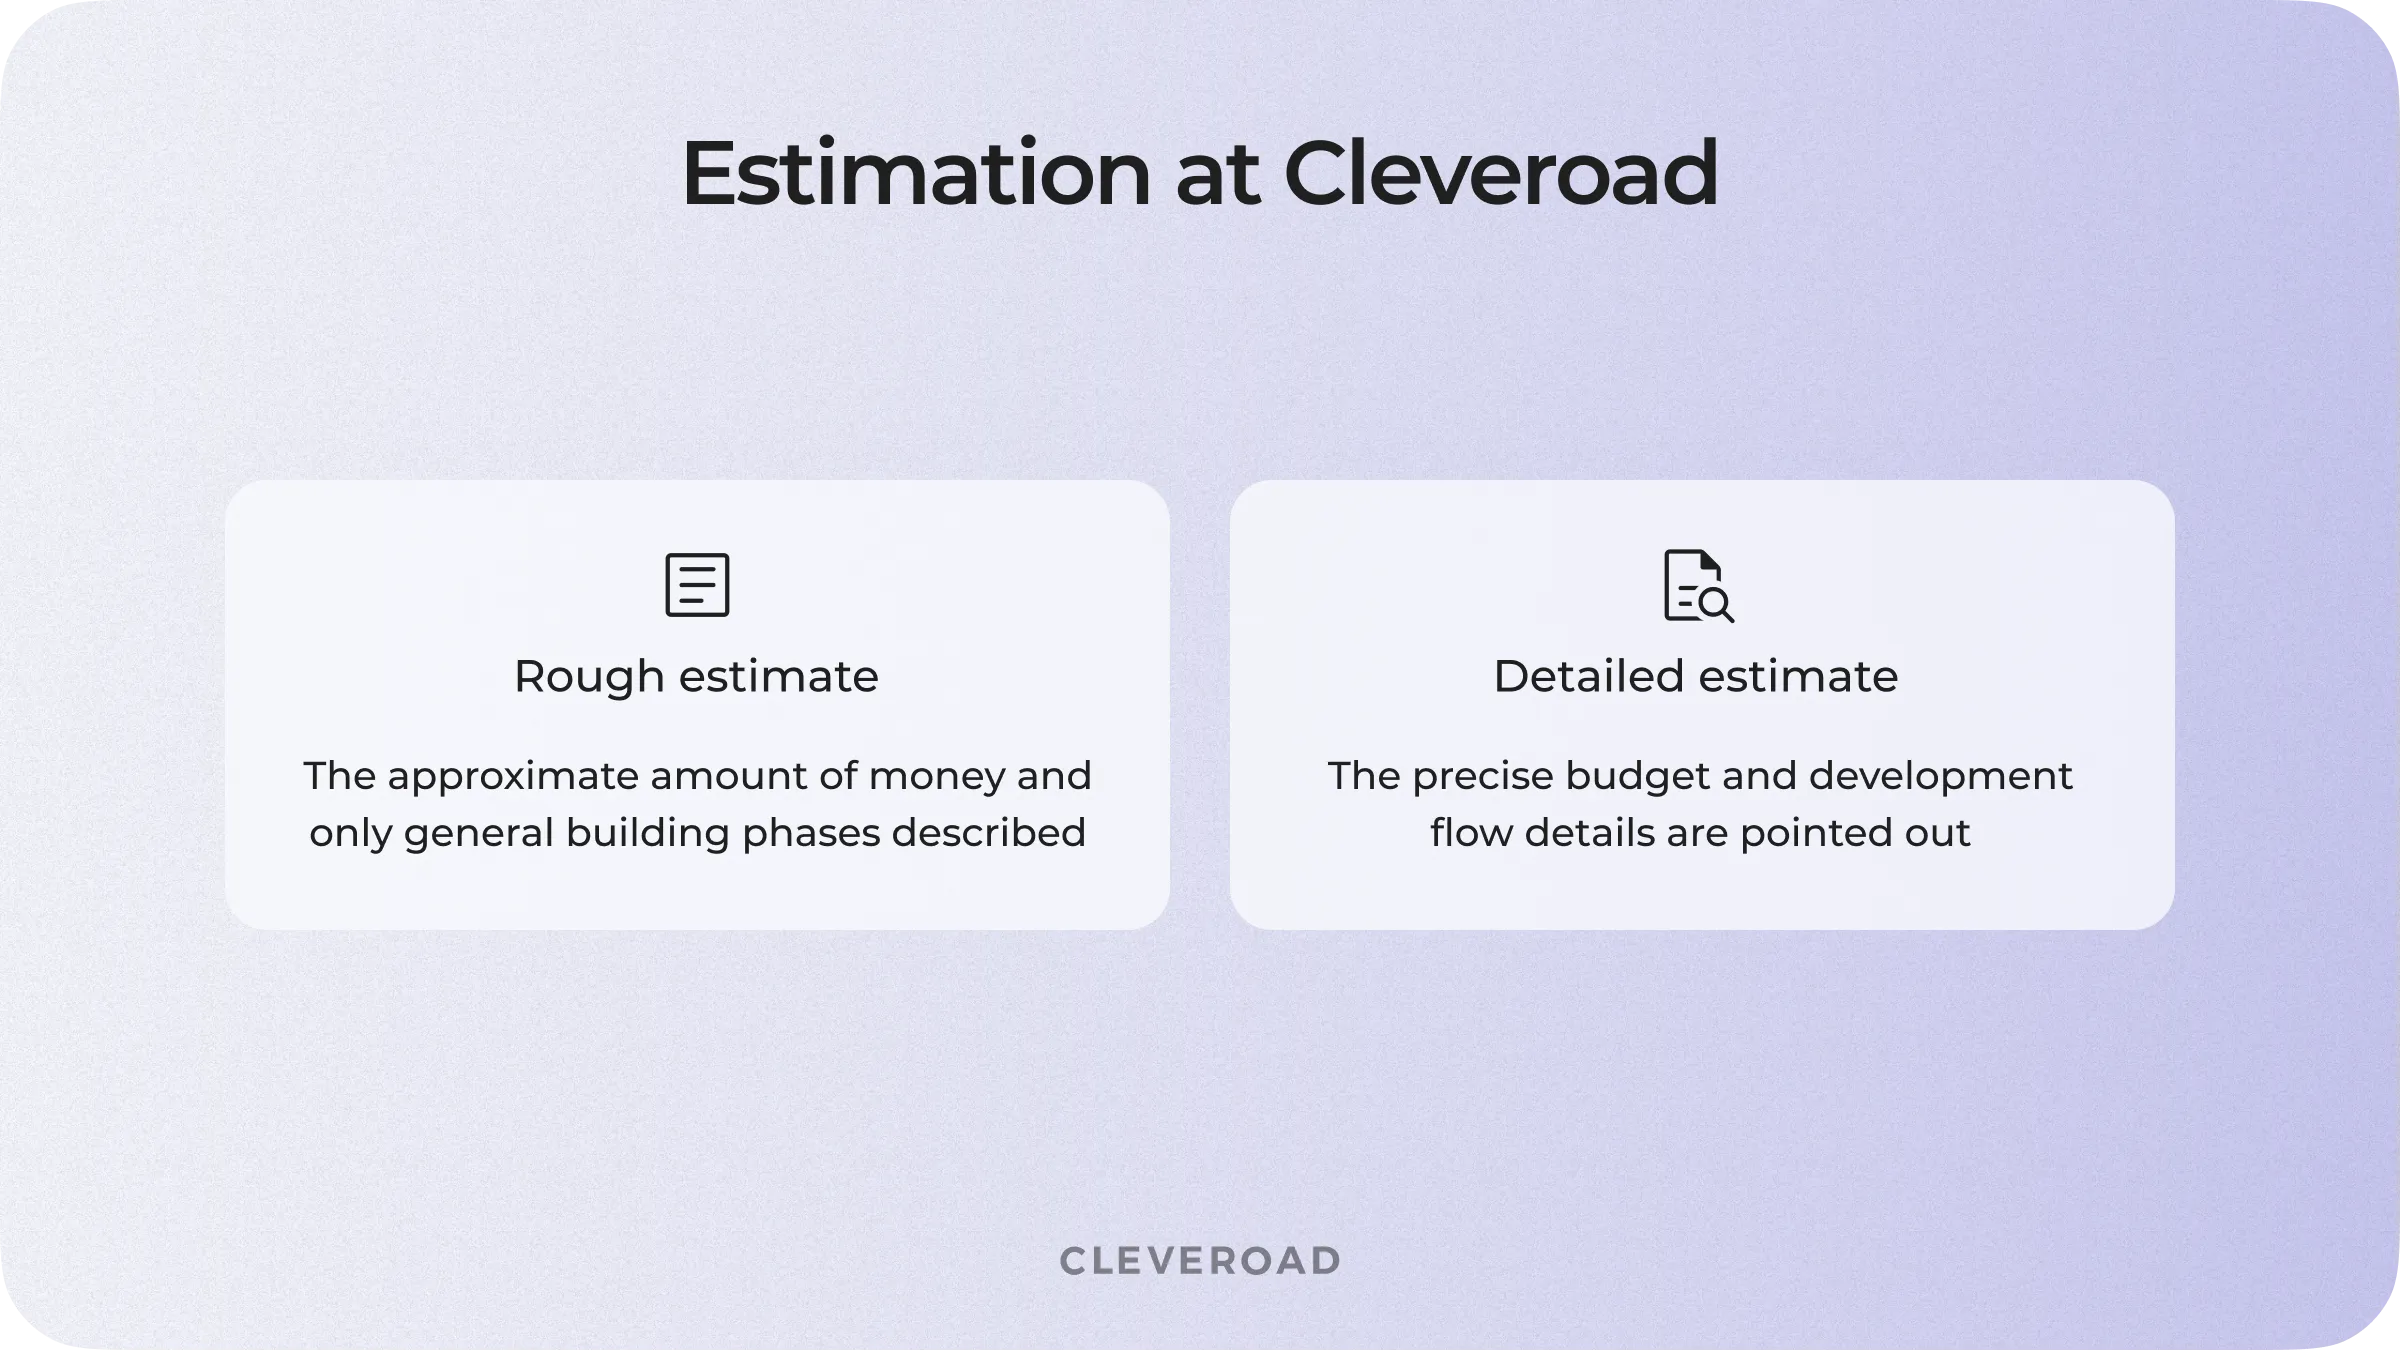 Estimation at Cleveroad